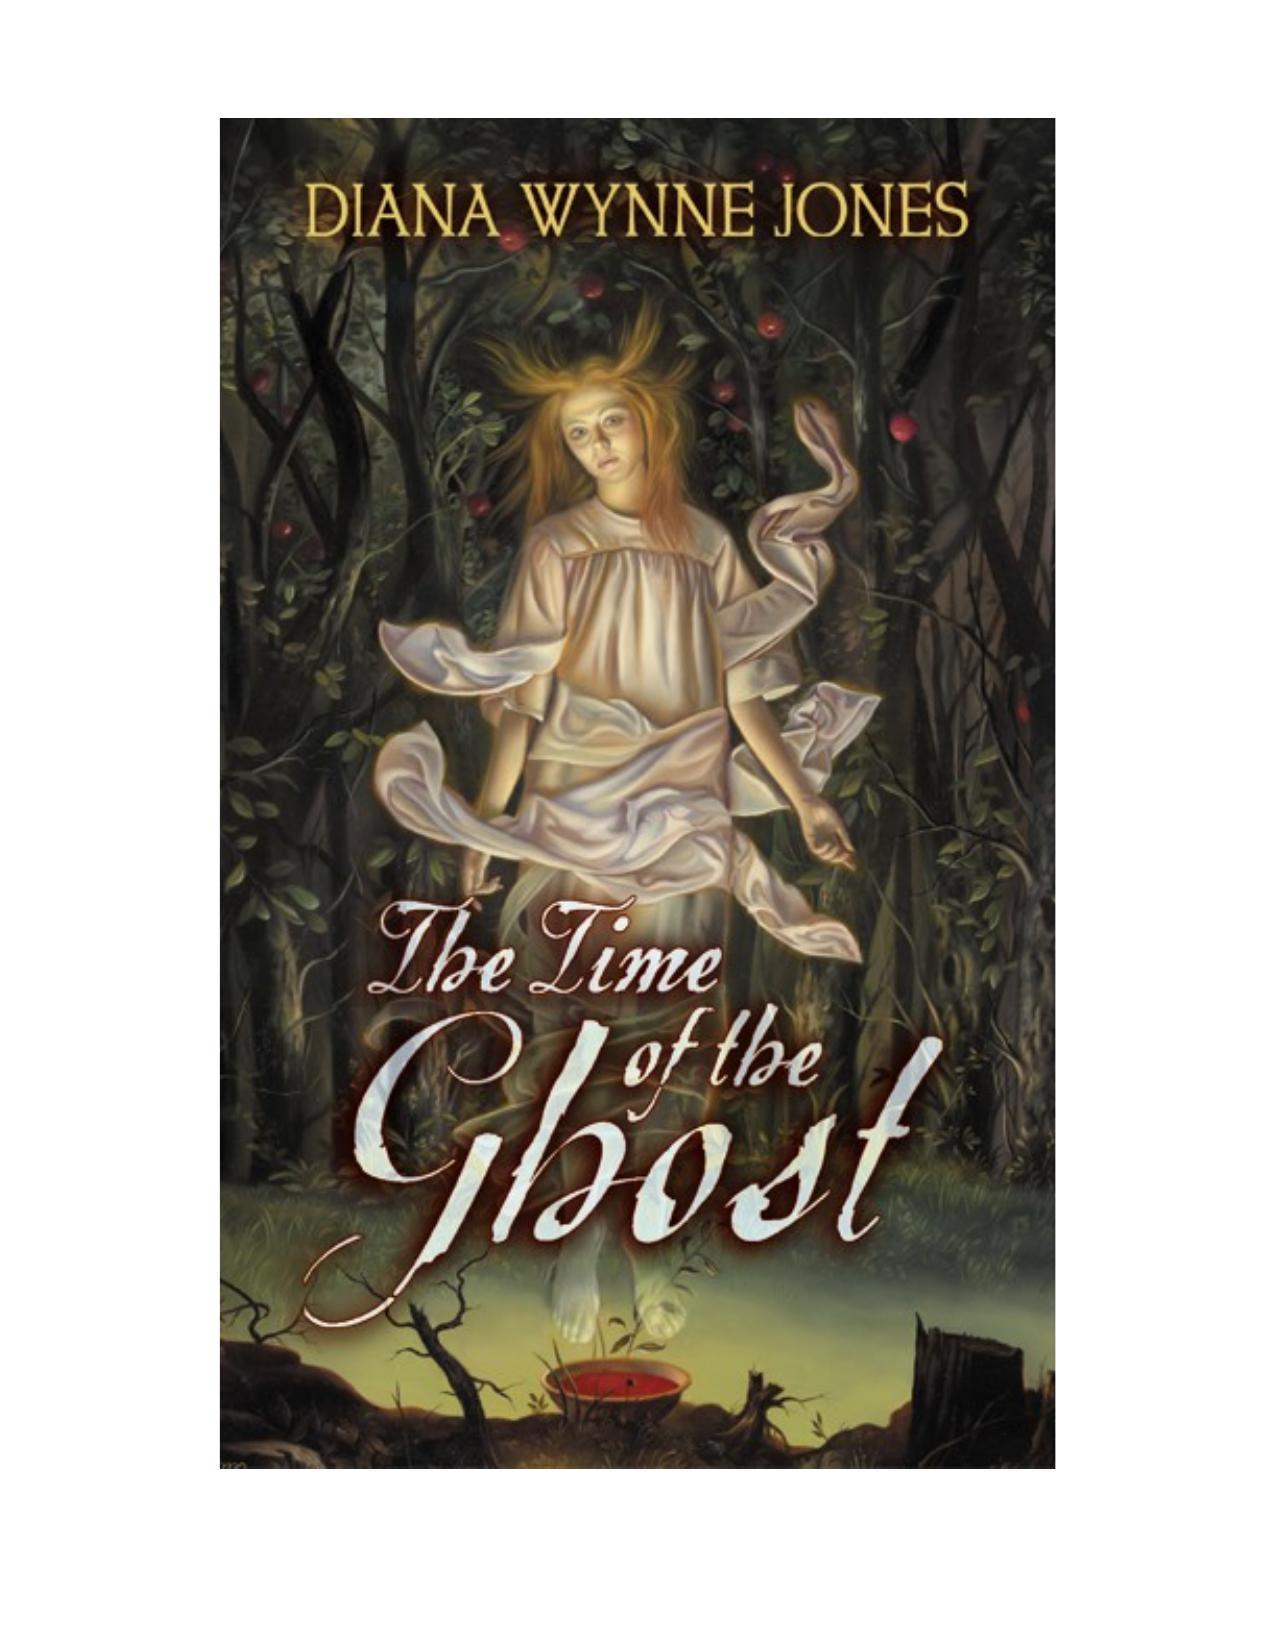 The Time of the Ghost by Diana Wynne Jones